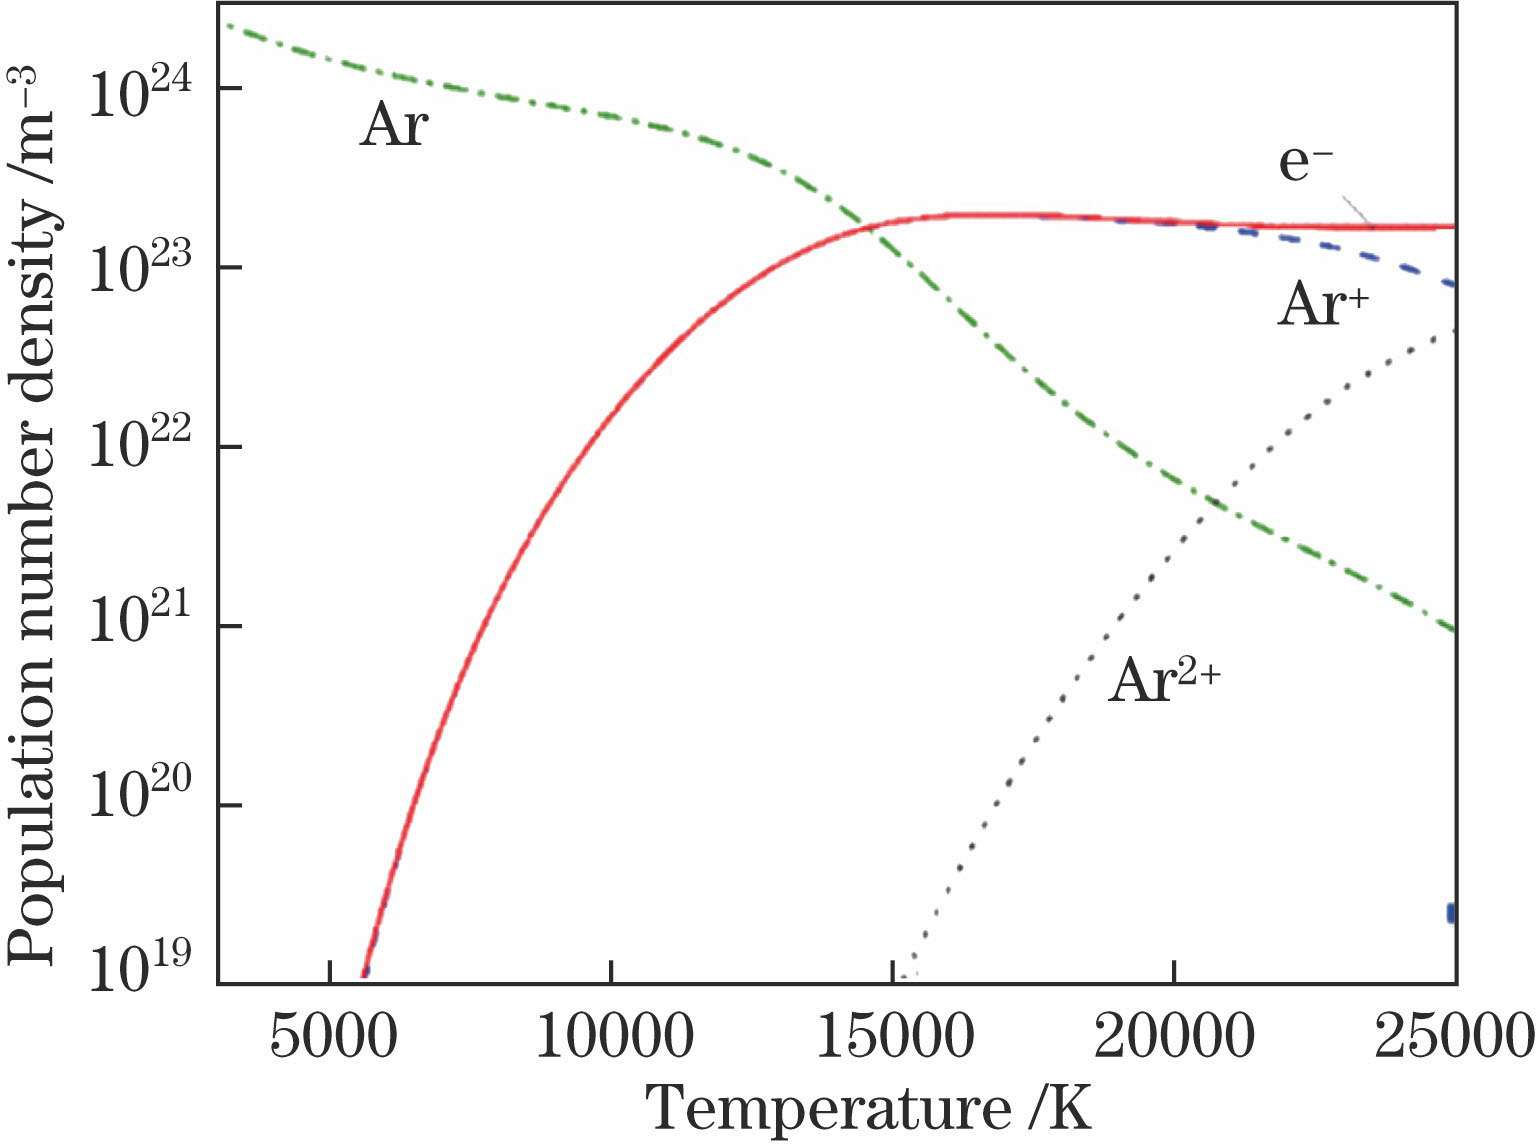 Equilibrium composition for argon plasma under atmospheric preesure with temperature from 5000 K to 25000 K